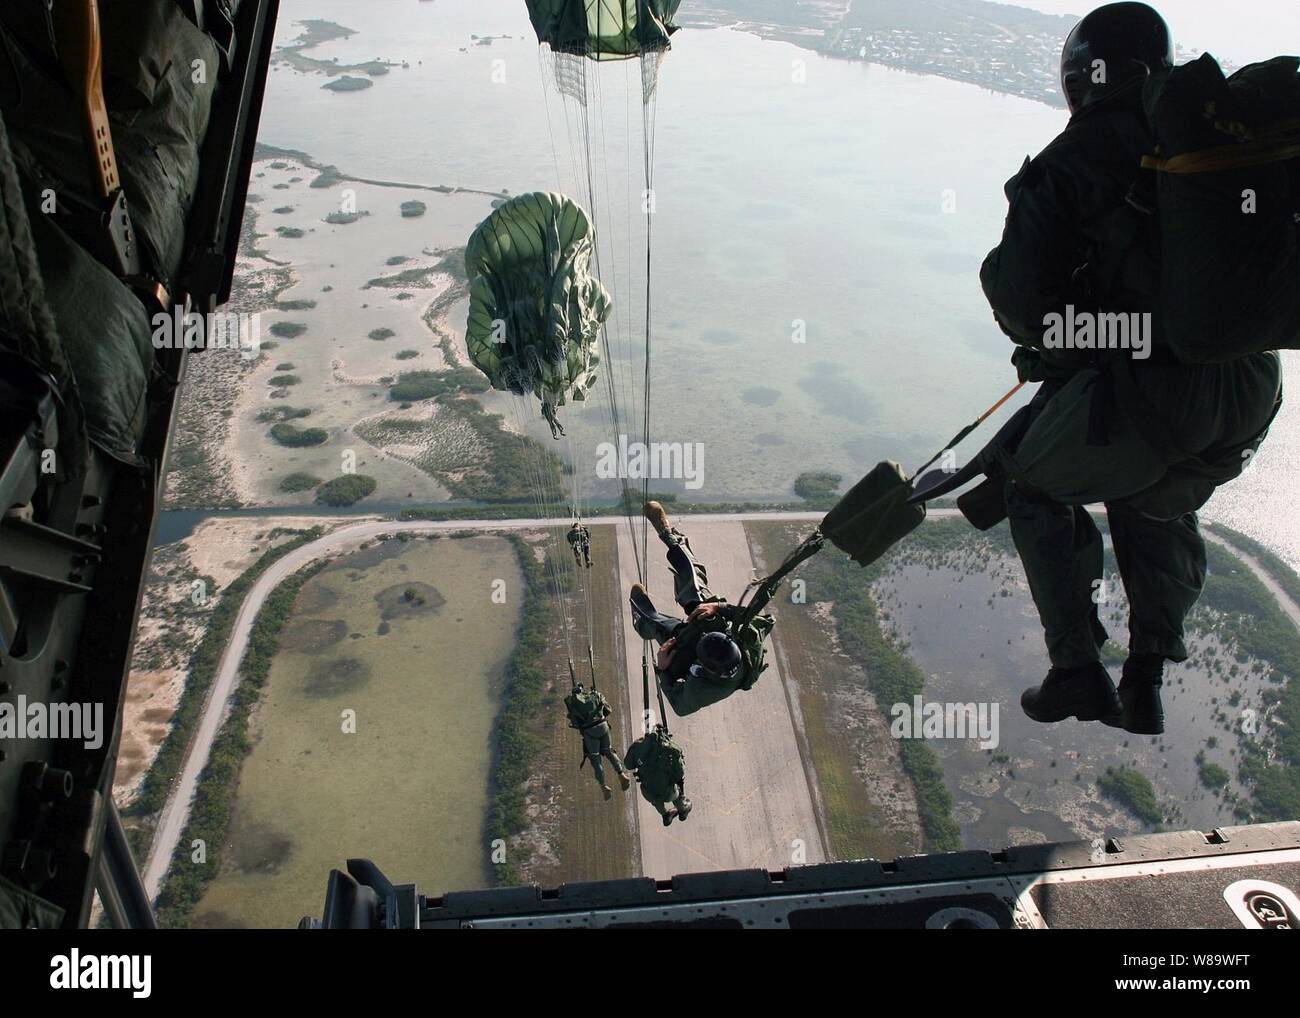 U.S. Navy Special Warfare Combatant-craft Crewmen assigned to Special Boat Team 20 jump from an Air Force C-130 Hercules aircraft during a static-line parachute jump over Key West Fla., on March 3, 2008. Stock Photo